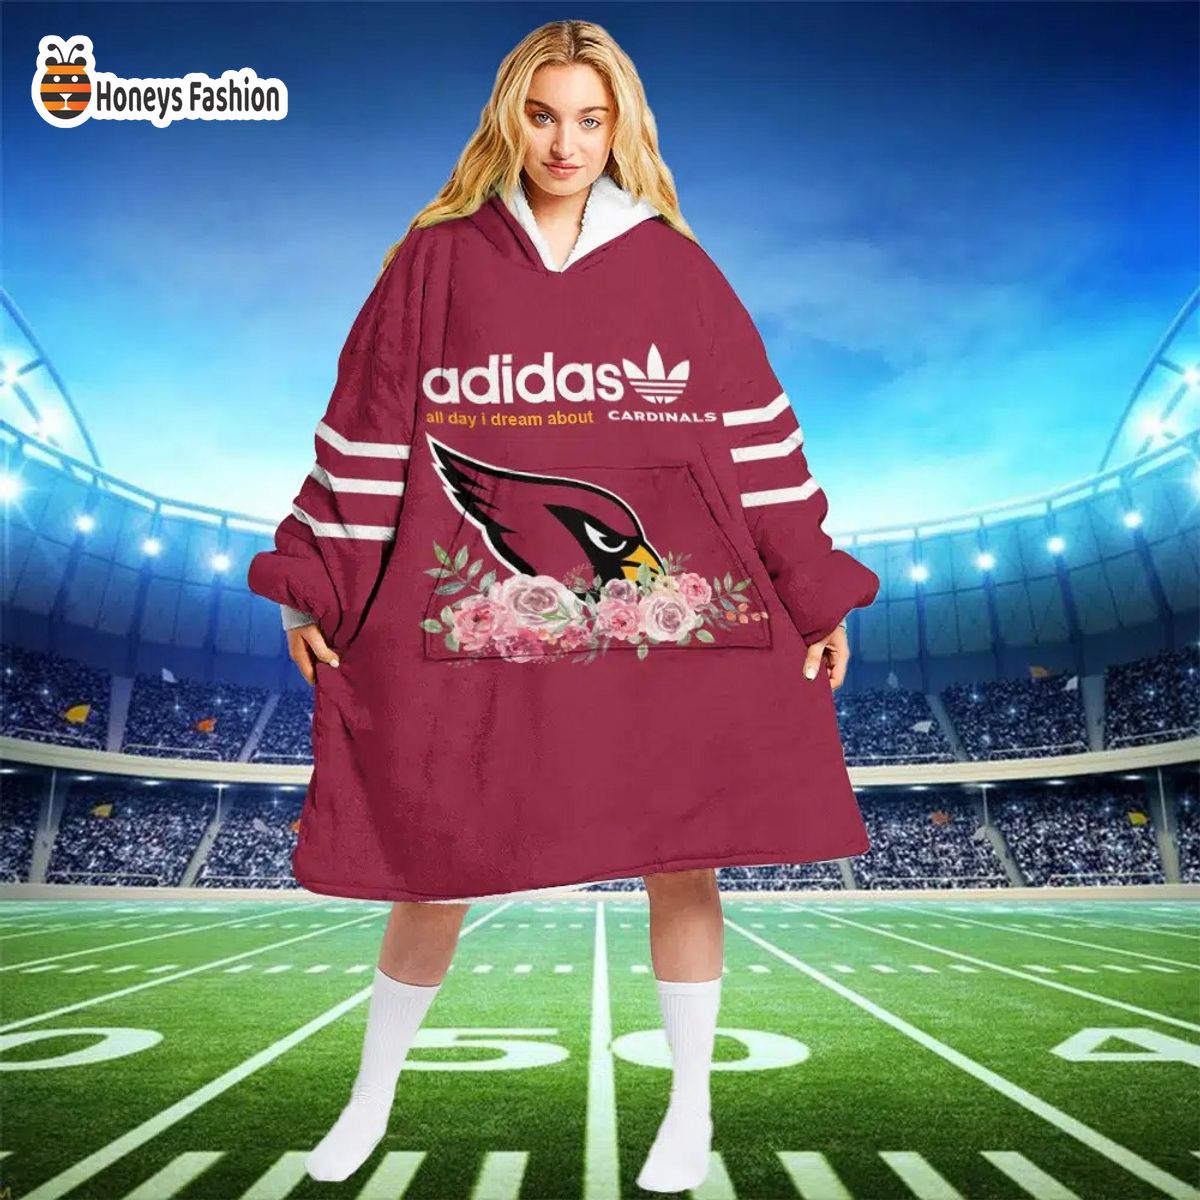 Arizona Cardinals NFL Adidas all day i dream about Cardinals blanket hoodie